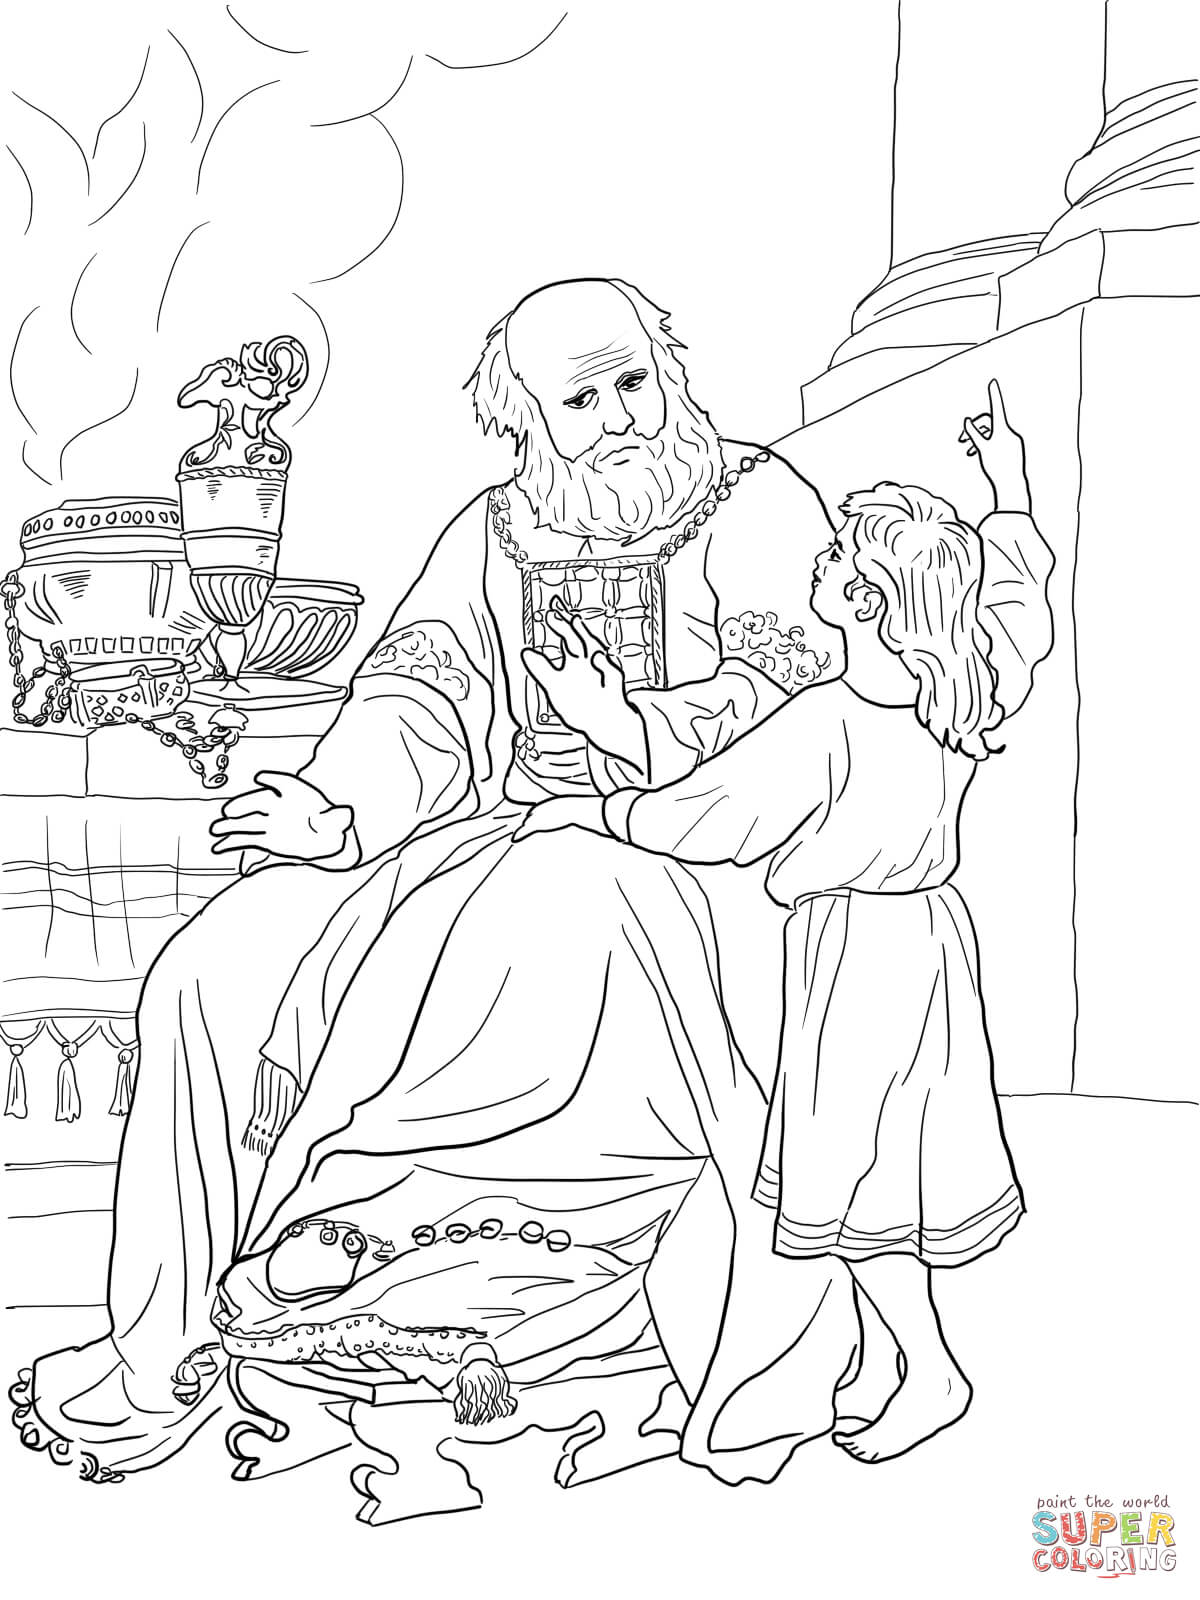 8 Pics of Baby Samuel Coloring Page - 1 Samuel Coloring Page ...